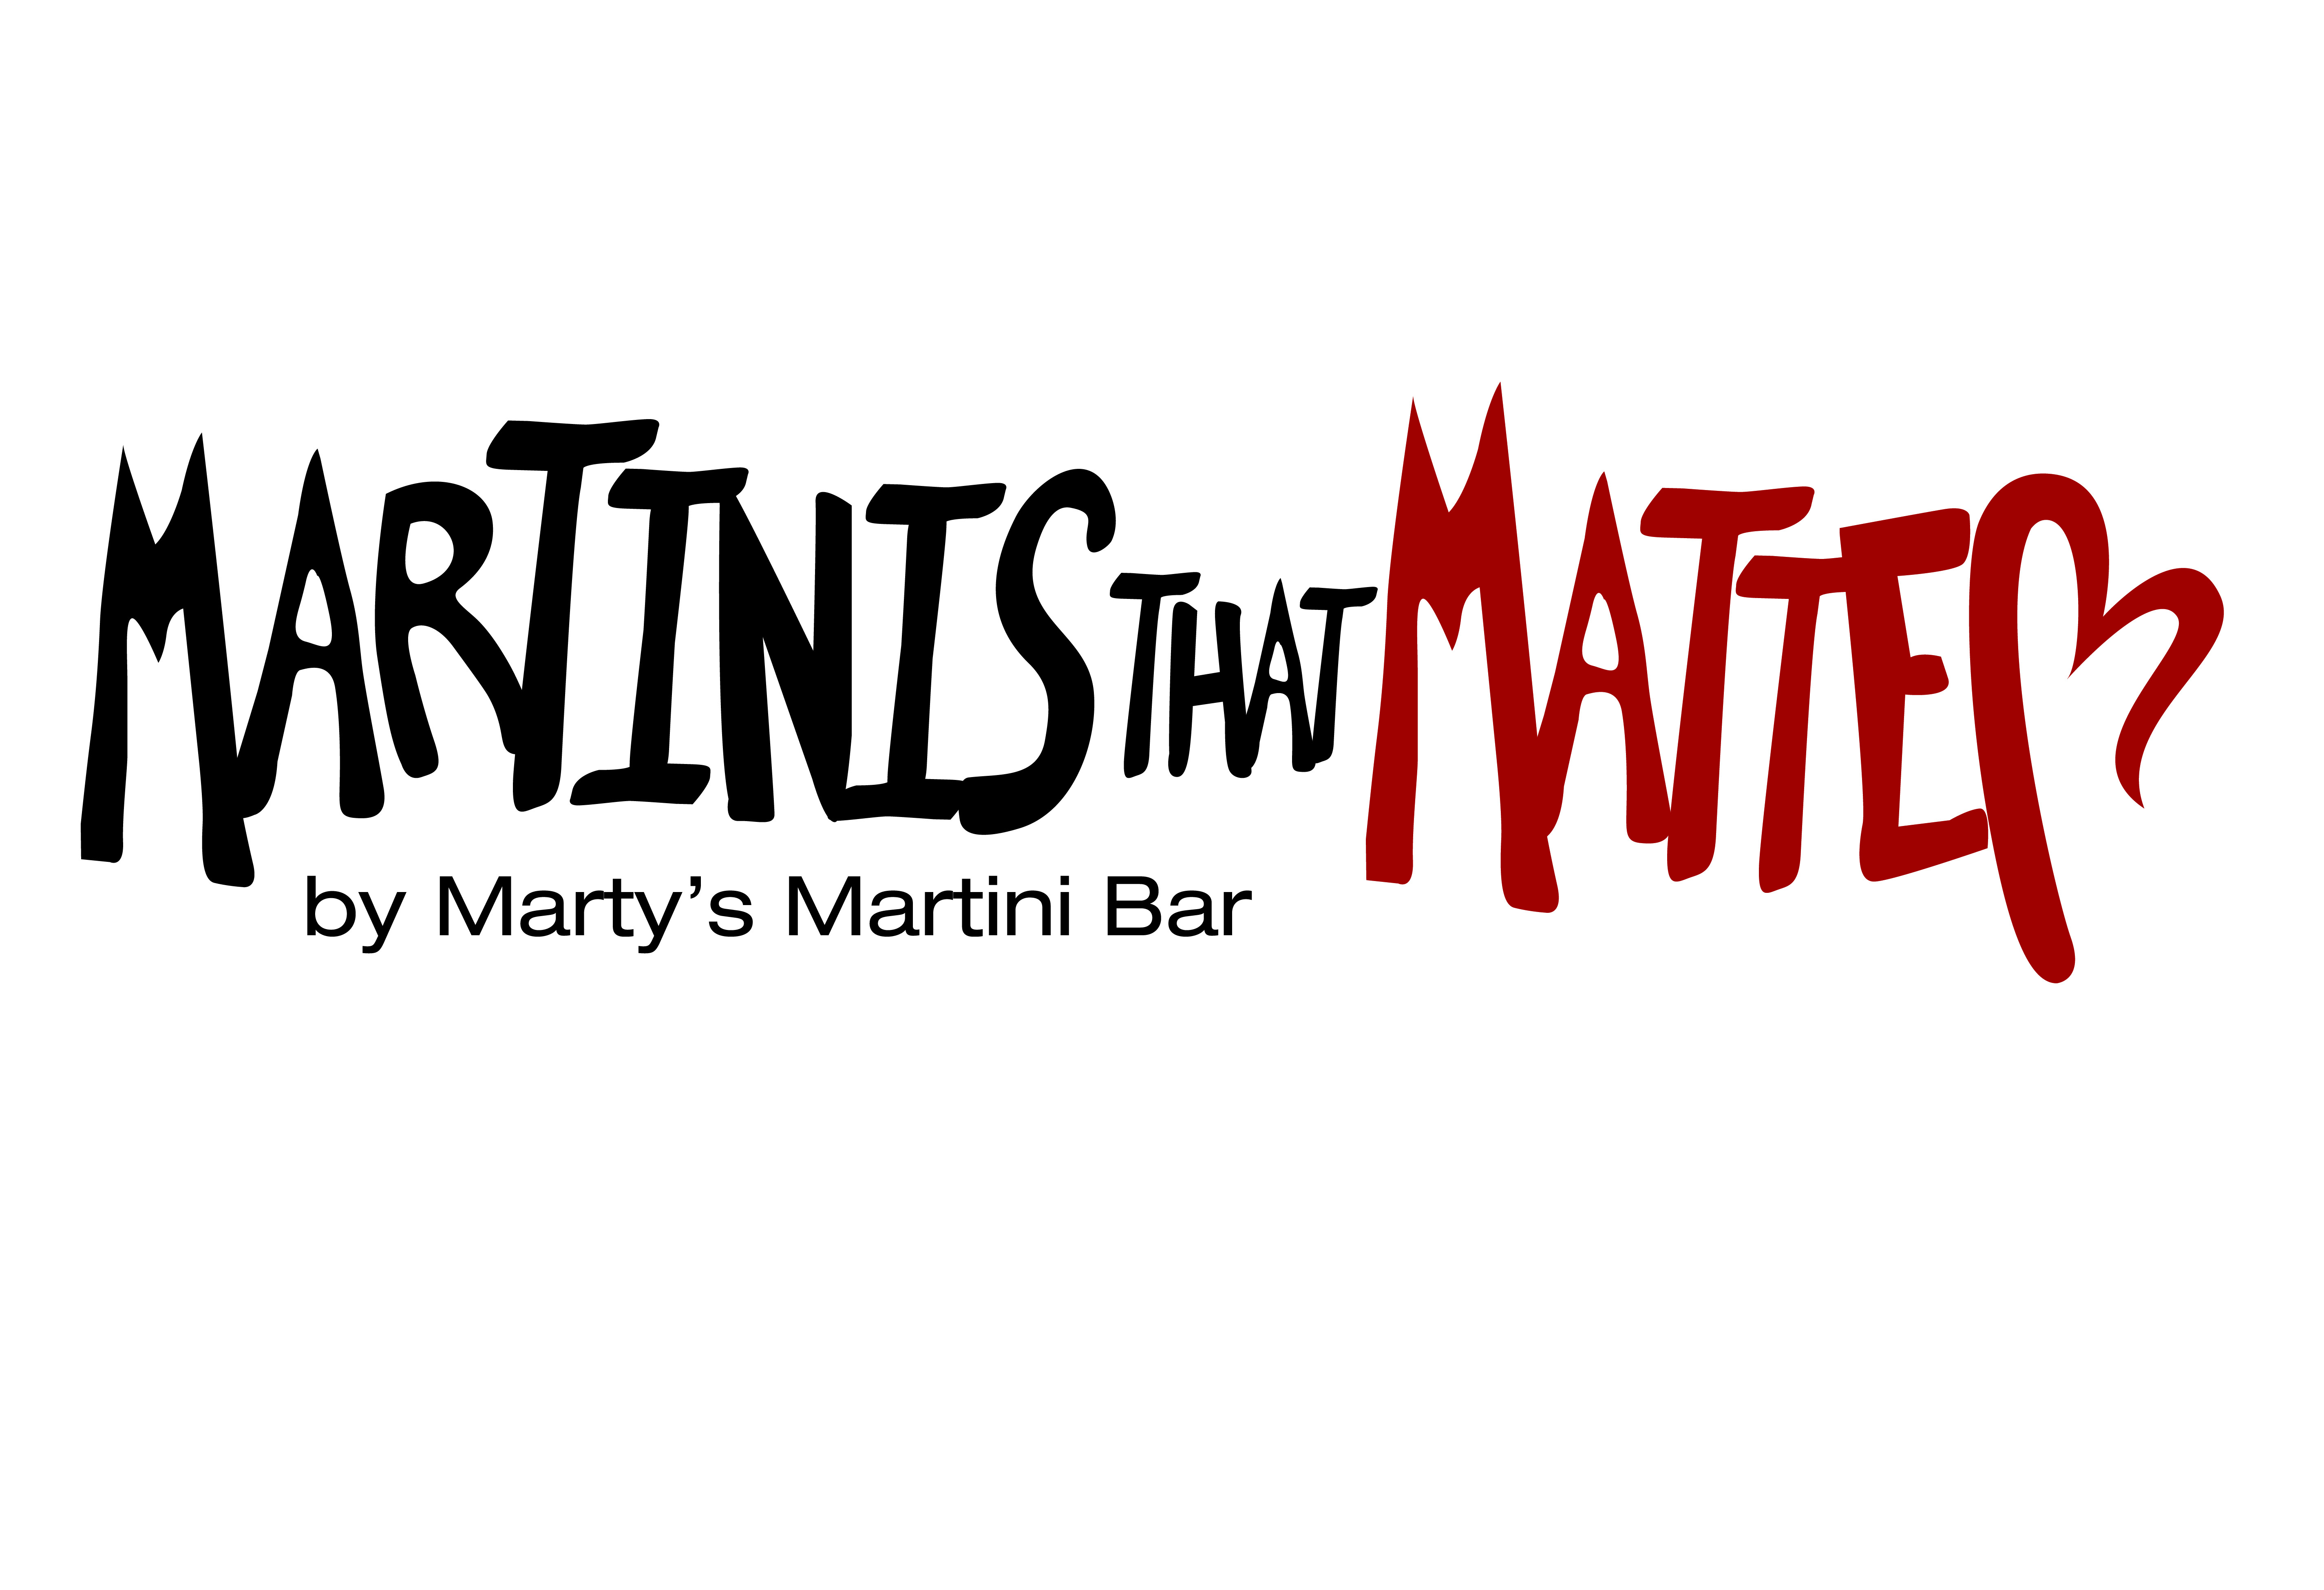 Join us for a drink at Marty’s Martini Bar (1511 W Balmoral Ave) on Sunday, July 23, from 2-5 p.m. for a Martini’s that Matter fundraiser. Profits will go to The Boulevard.